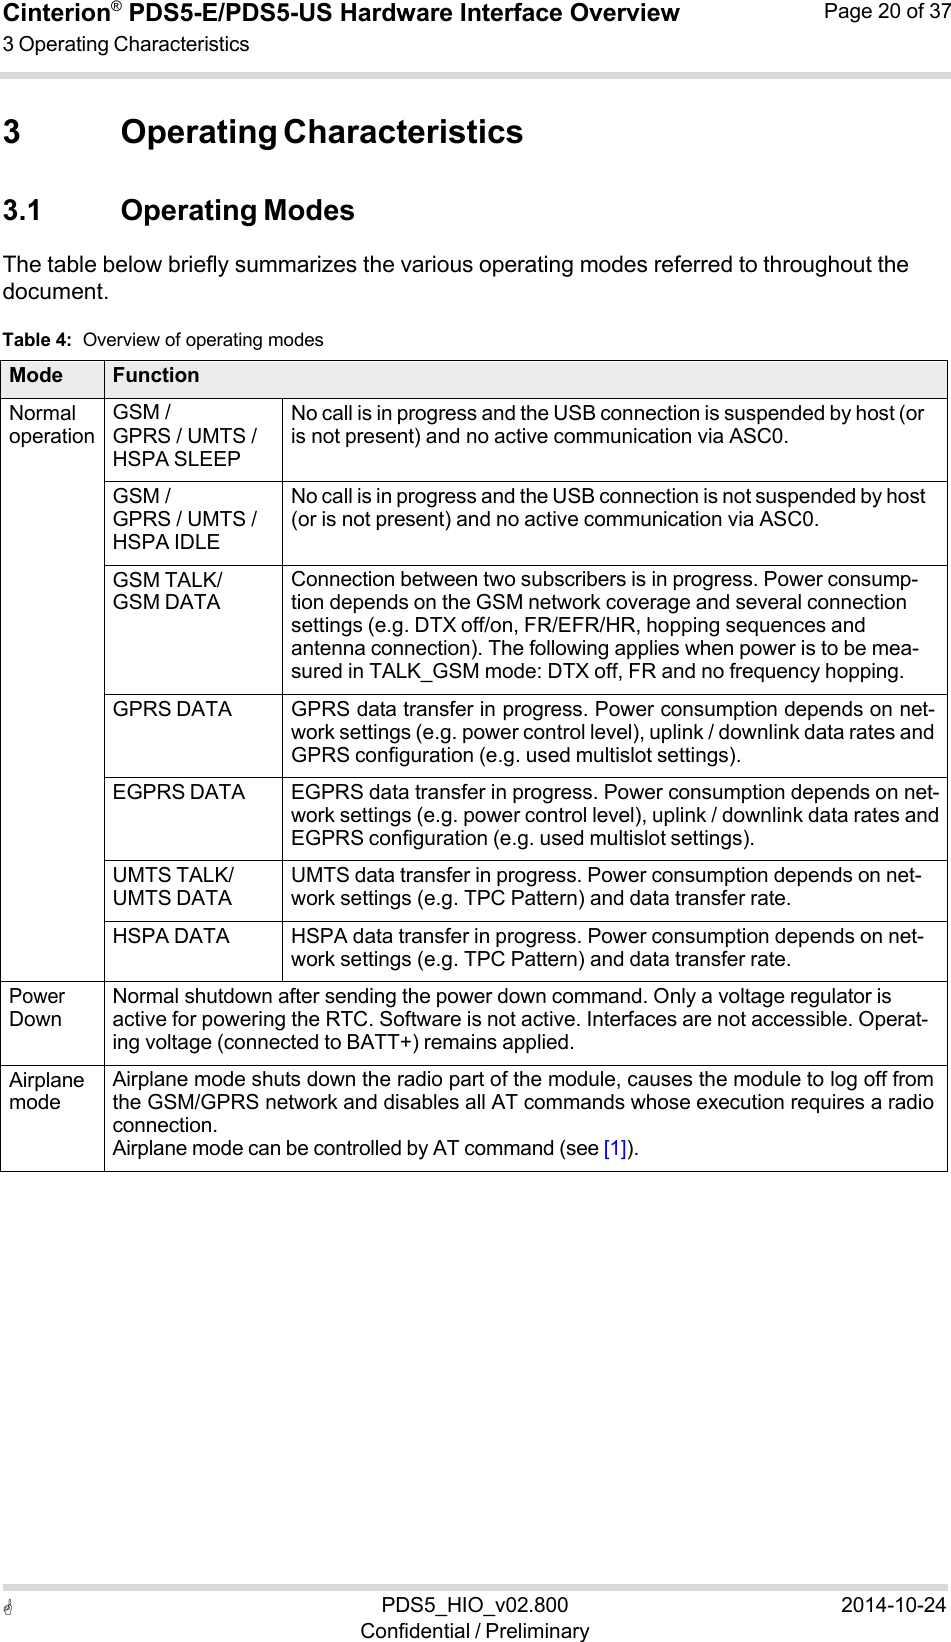  PDS5_HIO_v02.800Confidential / Preliminary2014-10-24Cinterion®  PDS5-E/PDS5-US Hardware Interface Overview3 Operating Characteristics Page 20 of 37   3 Operating Characteristics  3.1 Operating Modes The table below briefly summarizes the various operating modes referred to throughout the document.  Table 4:  Overview of operating modes  Mode Function Normal operation GSM / GPRS / UMTS / HSPA SLEEP No call is in progress and the USB connection is suspended by host (or is not present) and no active communication via ASC0. GSM / GPRS / UMTS / HSPA IDLE No call is in progress and the USB connection is not suspended by host (or is not present) and no active communication via ASC0. GSM TALK/ GSM DATA Connection between two subscribers is in progress. Power consump- tion depends on the GSM network coverage and several connection settings (e.g. DTX off/on, FR/EFR/HR, hopping sequences and antenna connection). The following applies when power is to be mea- sured in TALK_GSM mode: DTX off, FR and no frequency hopping. GPRS DATA GPRS data transfer in progress. Power consumption depends on net-work settings (e.g. power control level), uplink / downlink data rates and GPRS configuration (e.g. used multislot settings). EGPRS DATA EGPRS data transfer in progress. Power consumption depends on net-work settings (e.g. power control level), uplink / downlink data rates andEGPRS configuration (e.g. used multislot settings). UMTS TALK/ UMTS DATA UMTS data transfer in progress. Power consumption depends on net- work settings (e.g. TPC Pattern) and data transfer rate. HSPA DATA HSPA data transfer in progress. Power consumption depends on net- work settings (e.g. TPC Pattern) and data transfer rate. Power Down Normal shutdown after sending the power down command. Only a voltage regulator is active for powering the RTC. Software is not active. Interfaces are not accessible. Operat- ing voltage (connected to BATT+) remains applied. Airplane mode Airplane mode shuts down the radio part of the module, causes the module to log off fromthe GSM/GPRS network and disables all AT commands whose execution requires a radioconnection. Airplane mode can be controlled by AT command (see [1]). 